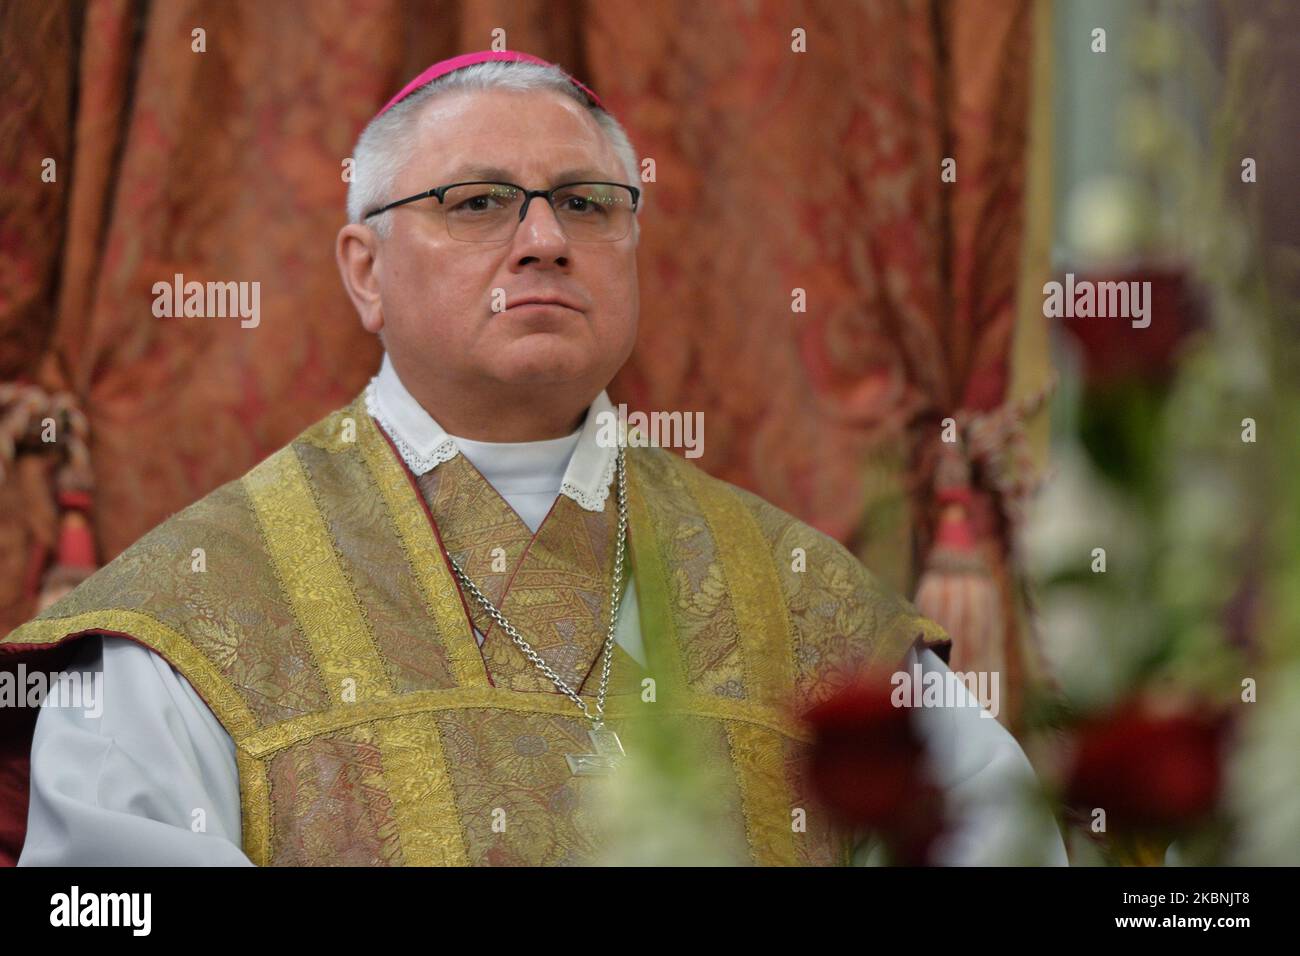 Bishop Artur G. Mizinski, during the Holy Mass on the occasion of the feast of Saint Stanislaus, bishop and martyr, the main patron of Poland, with the participation of the Polish Episcopate. On Sunday, May 10, 2020, in Wawel Cathedral, Krakow, Poland. (Photo by Artur Widak/NurPhoto) Stock Photo